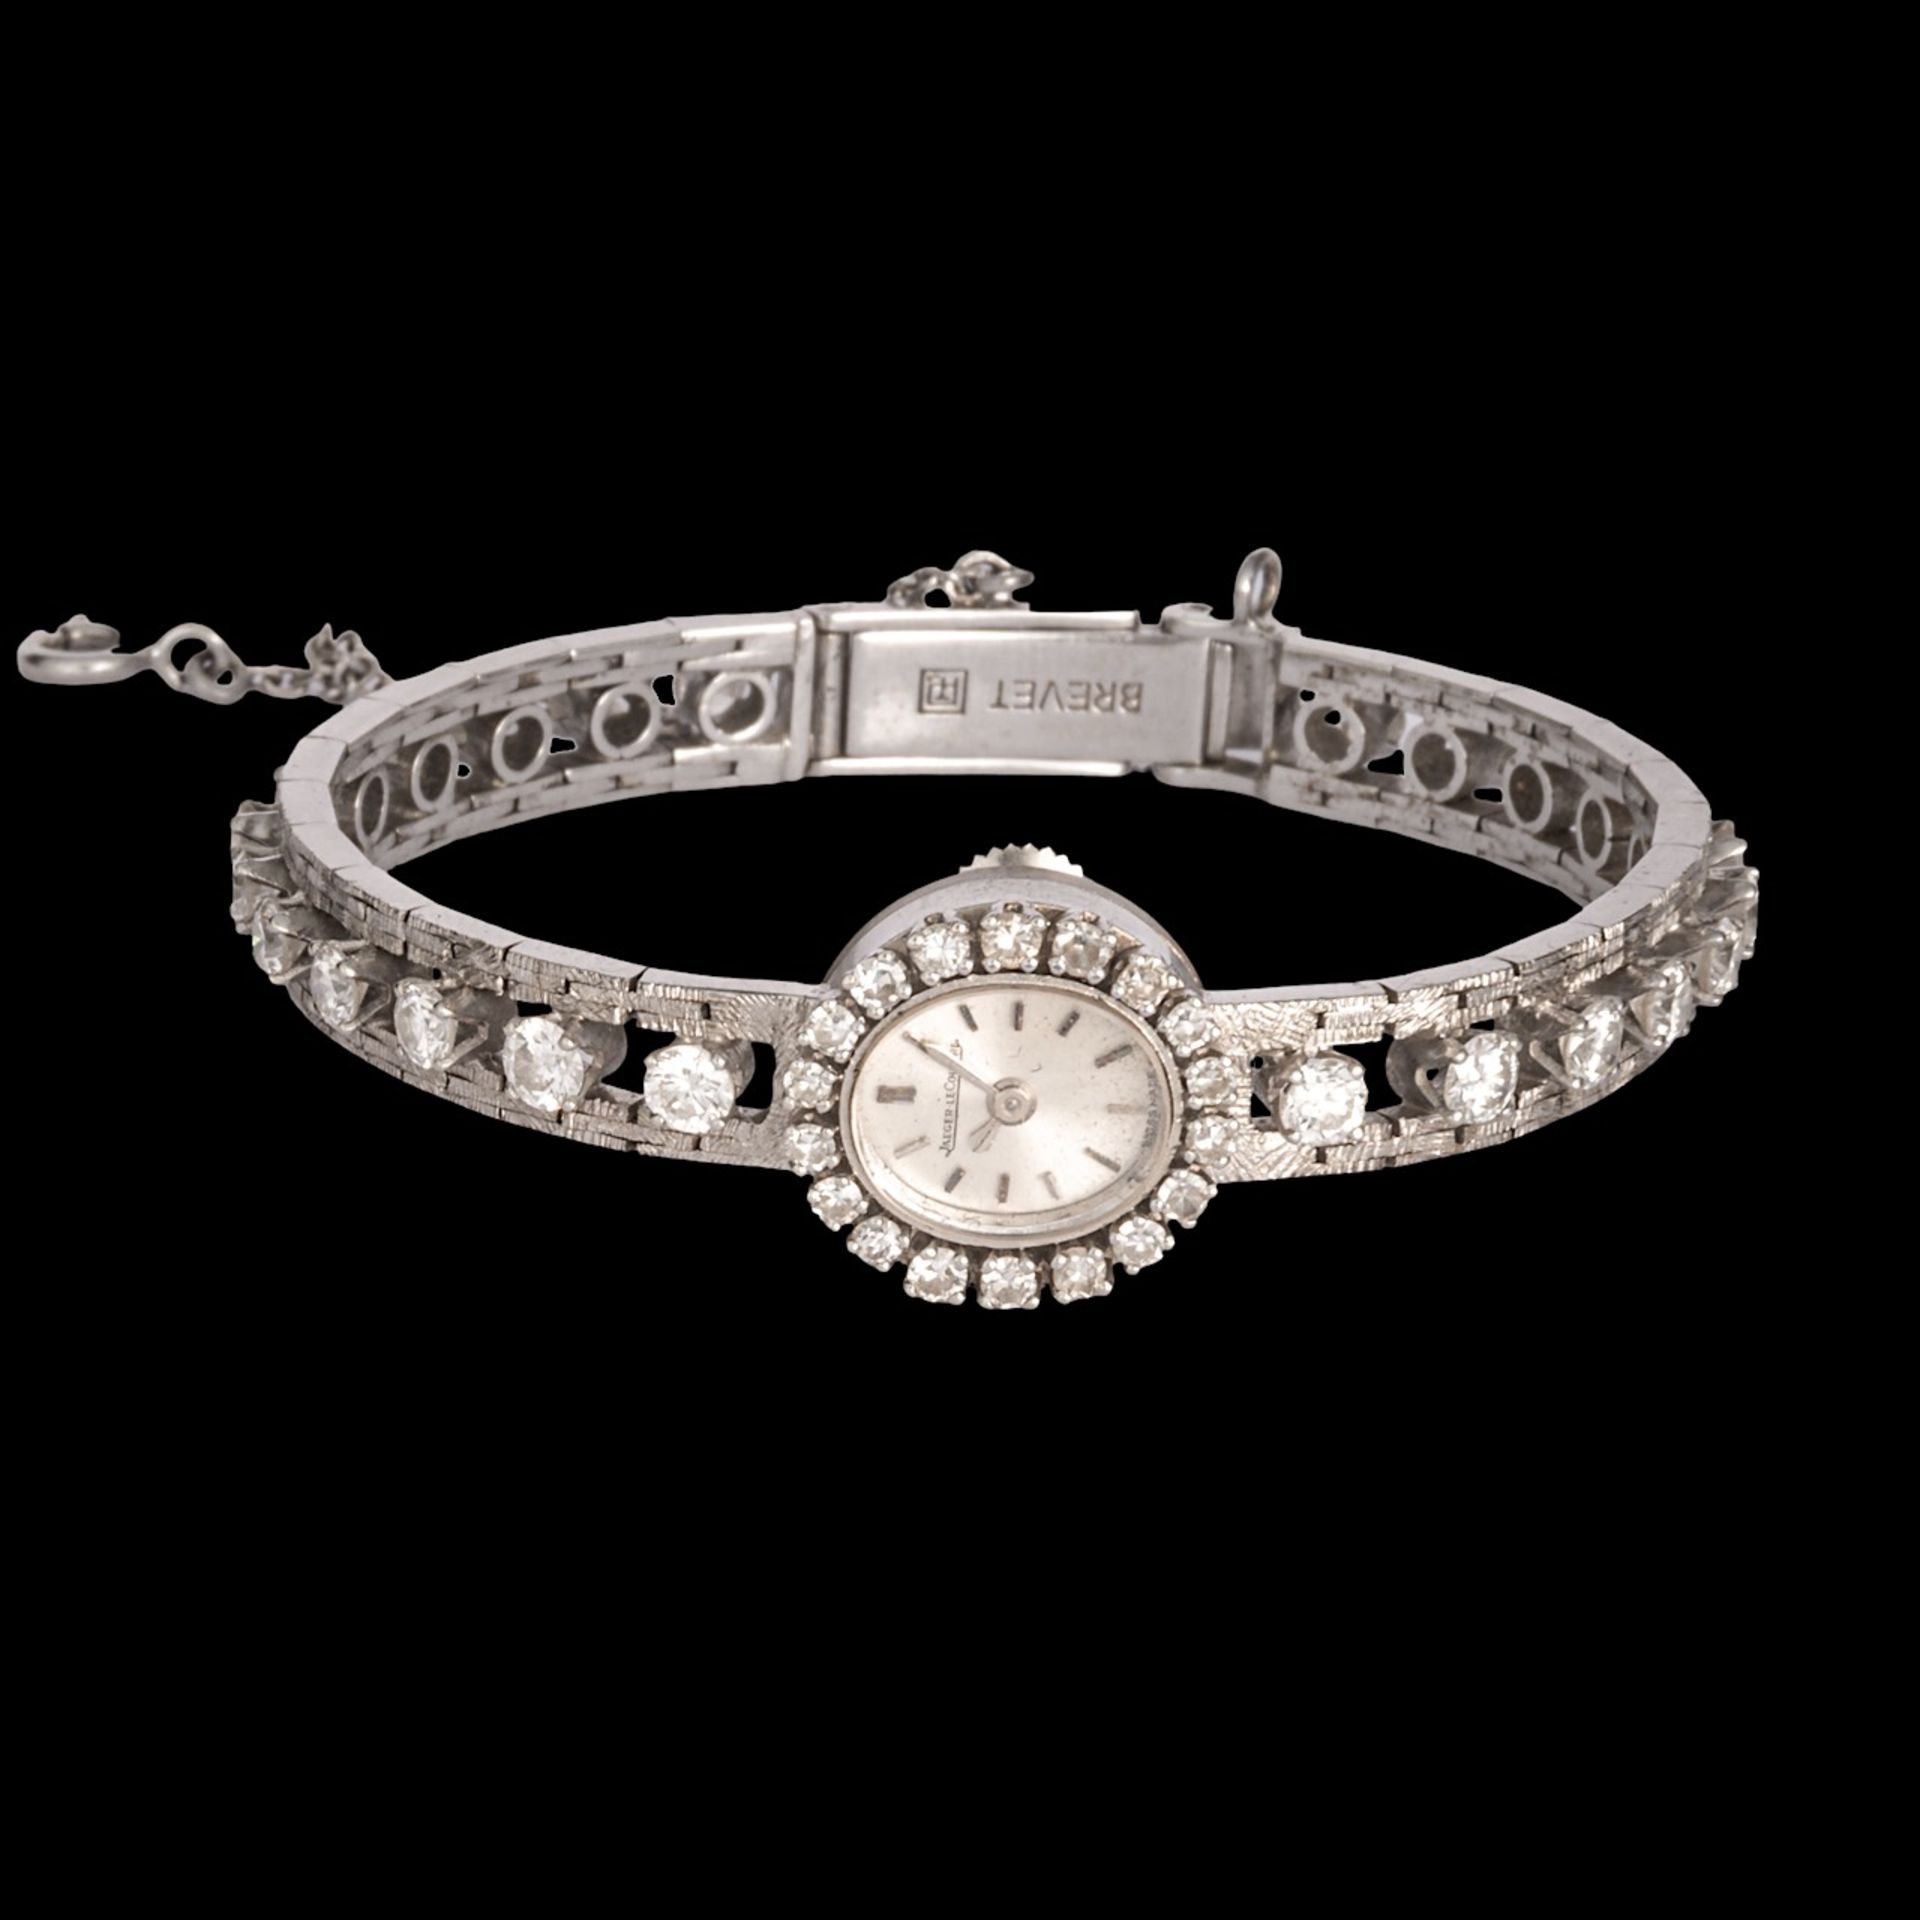 A Jaeger-Lecoultre ladies watch in 18ct white gold and set with diamonds, total weight: 21,3 g - Image 2 of 7